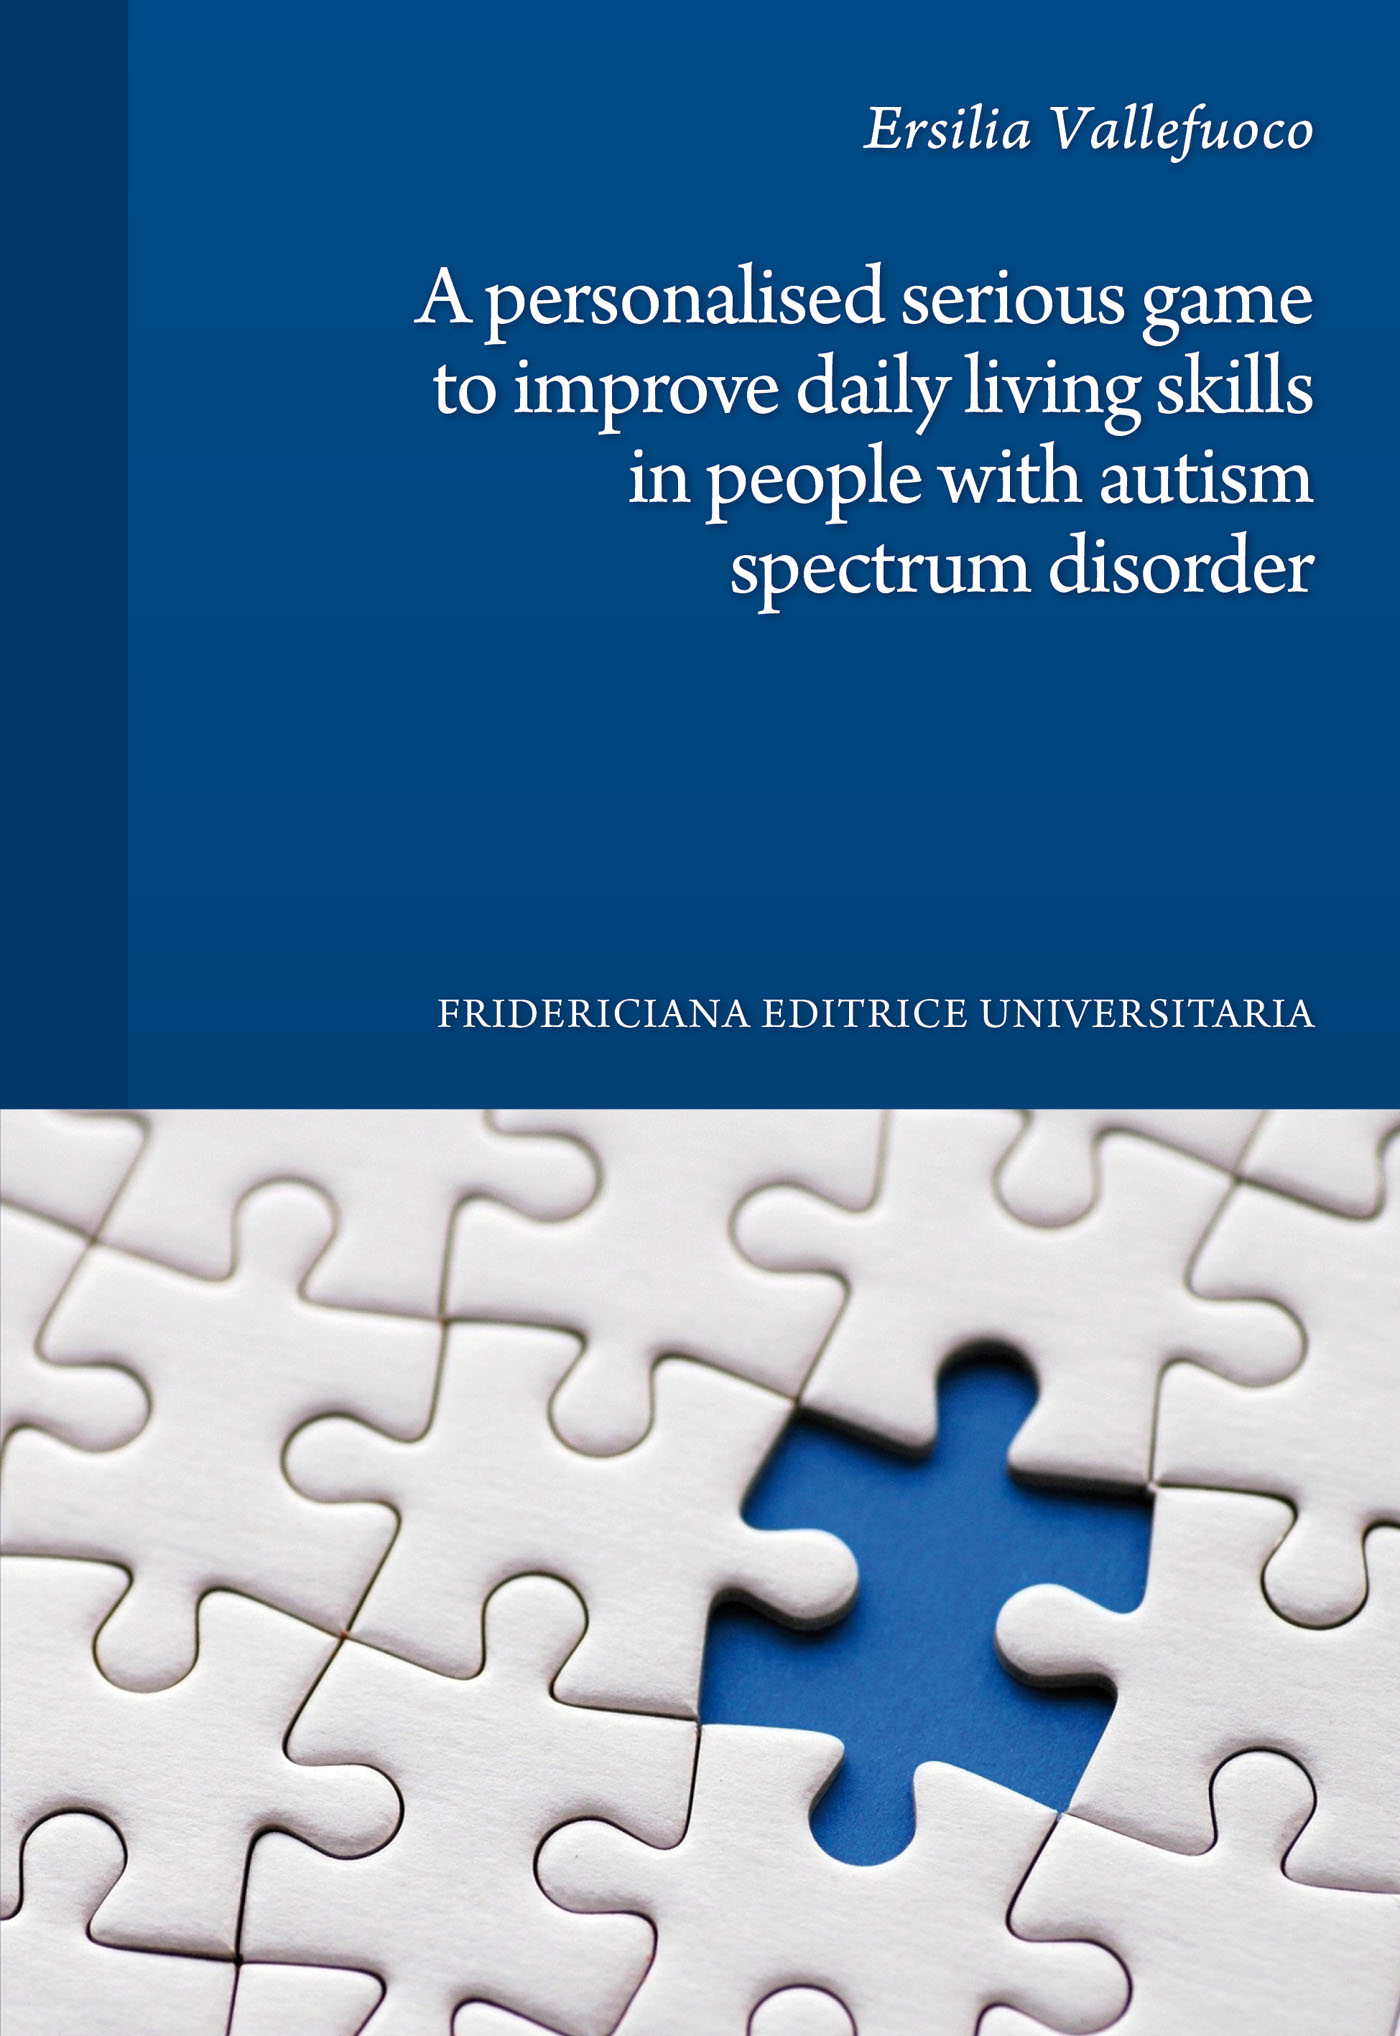 A personalised serious game to improve daily living skills in people with autism spectrum disorder